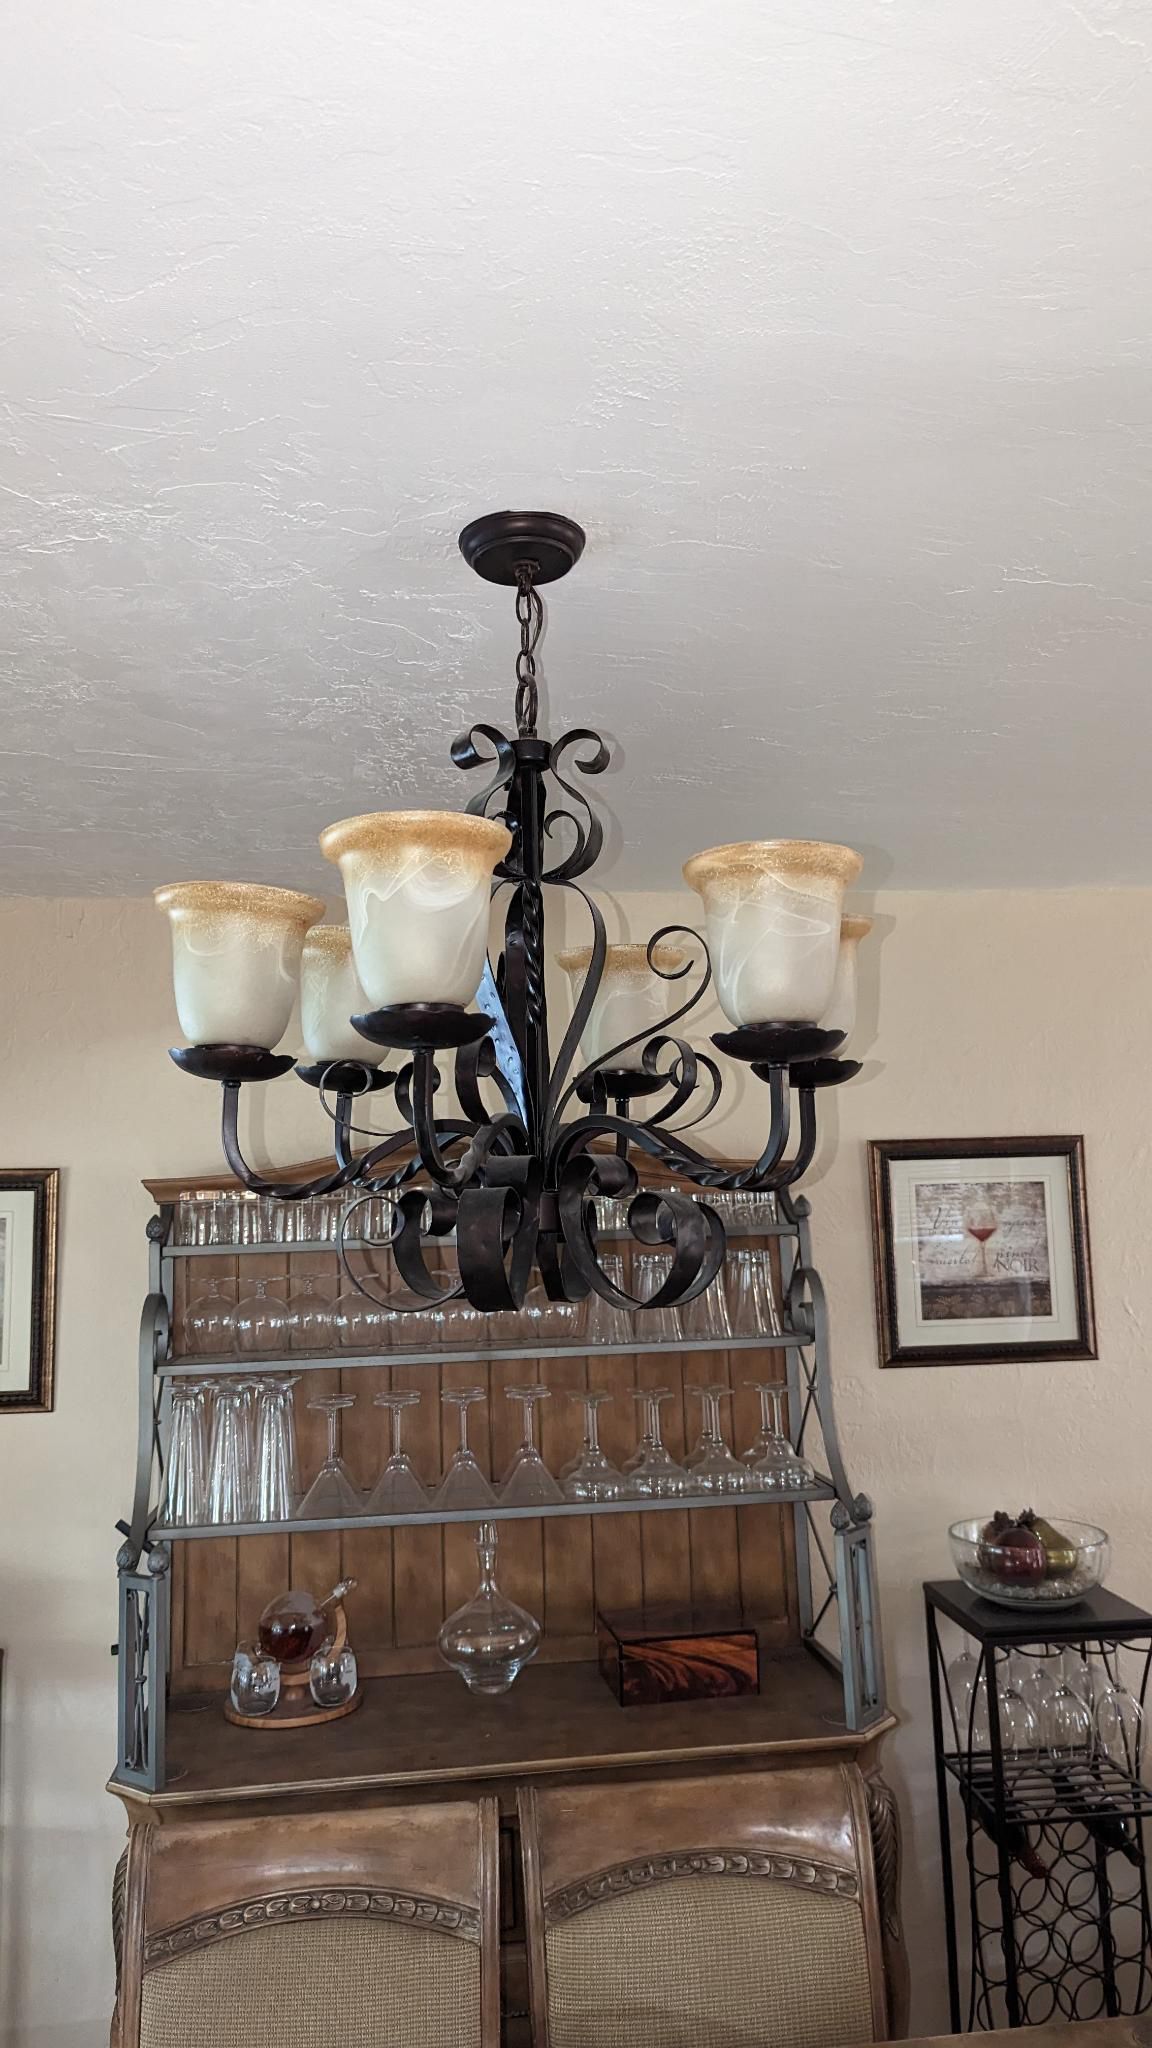 Chandelier, 2 Three Lamp and one single lamp